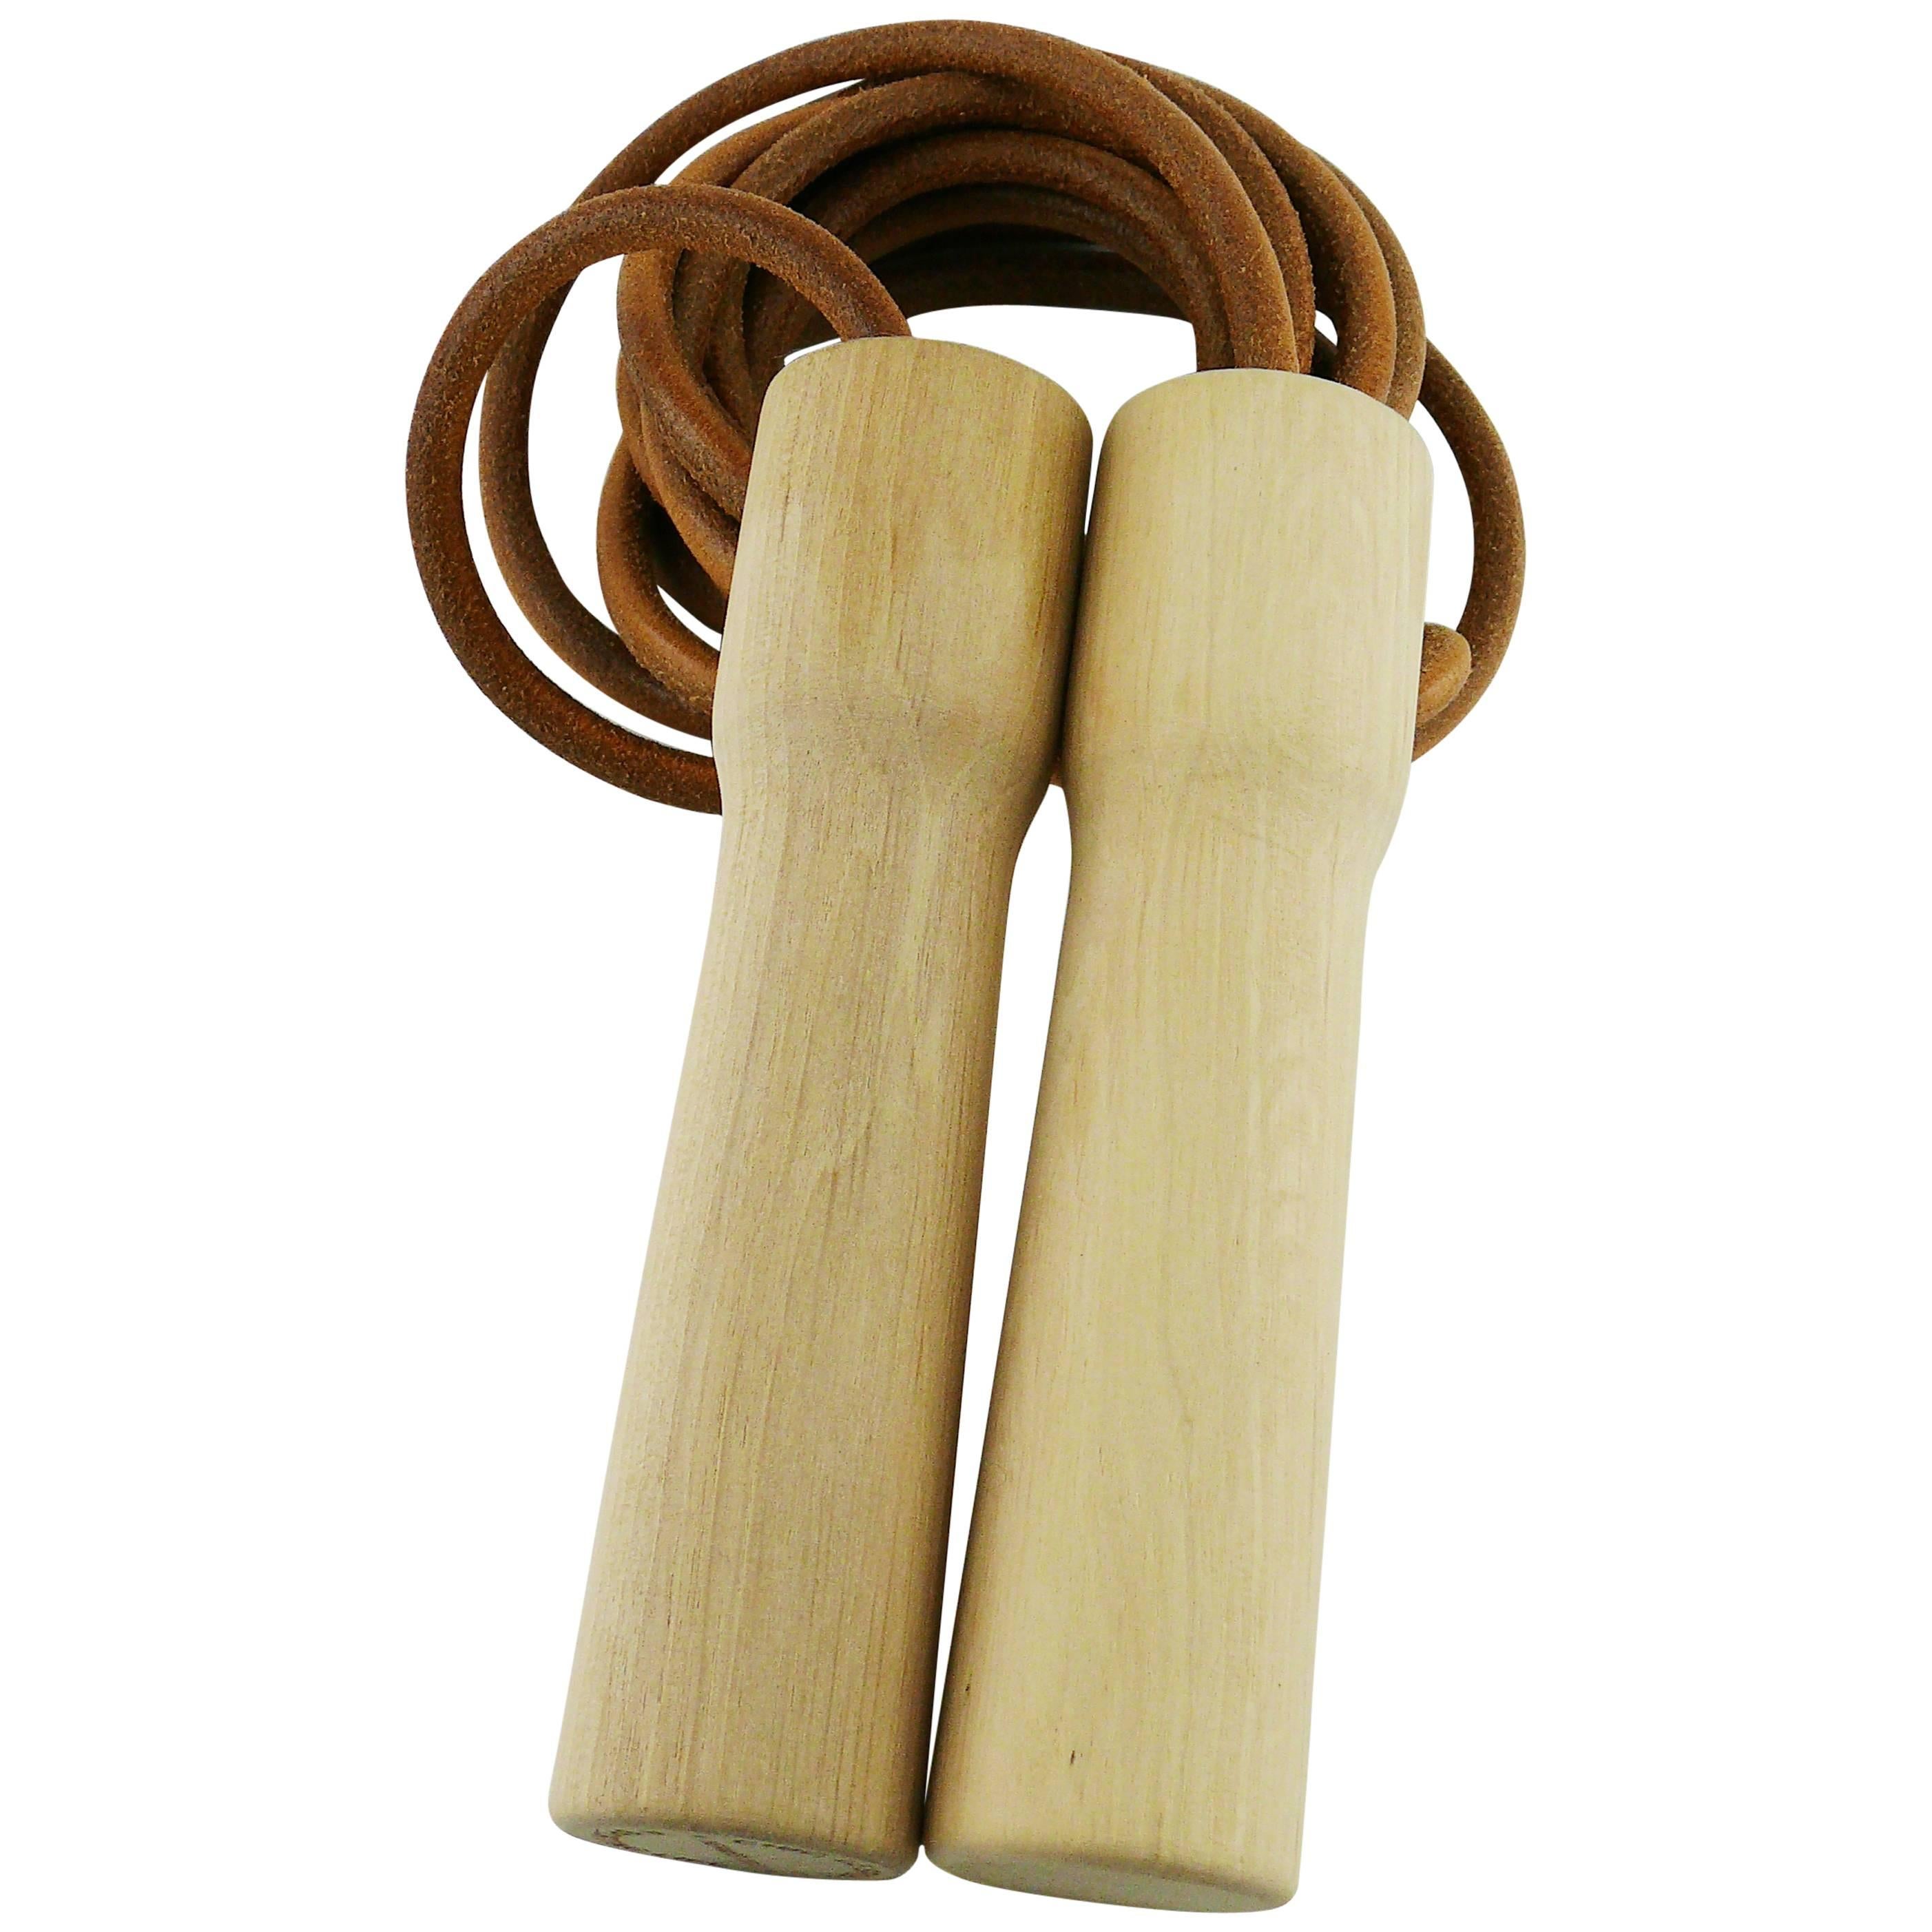 Hermes Uber Rare Limited Edition "A Sporting Life" Wood and Leather Jumping Rope